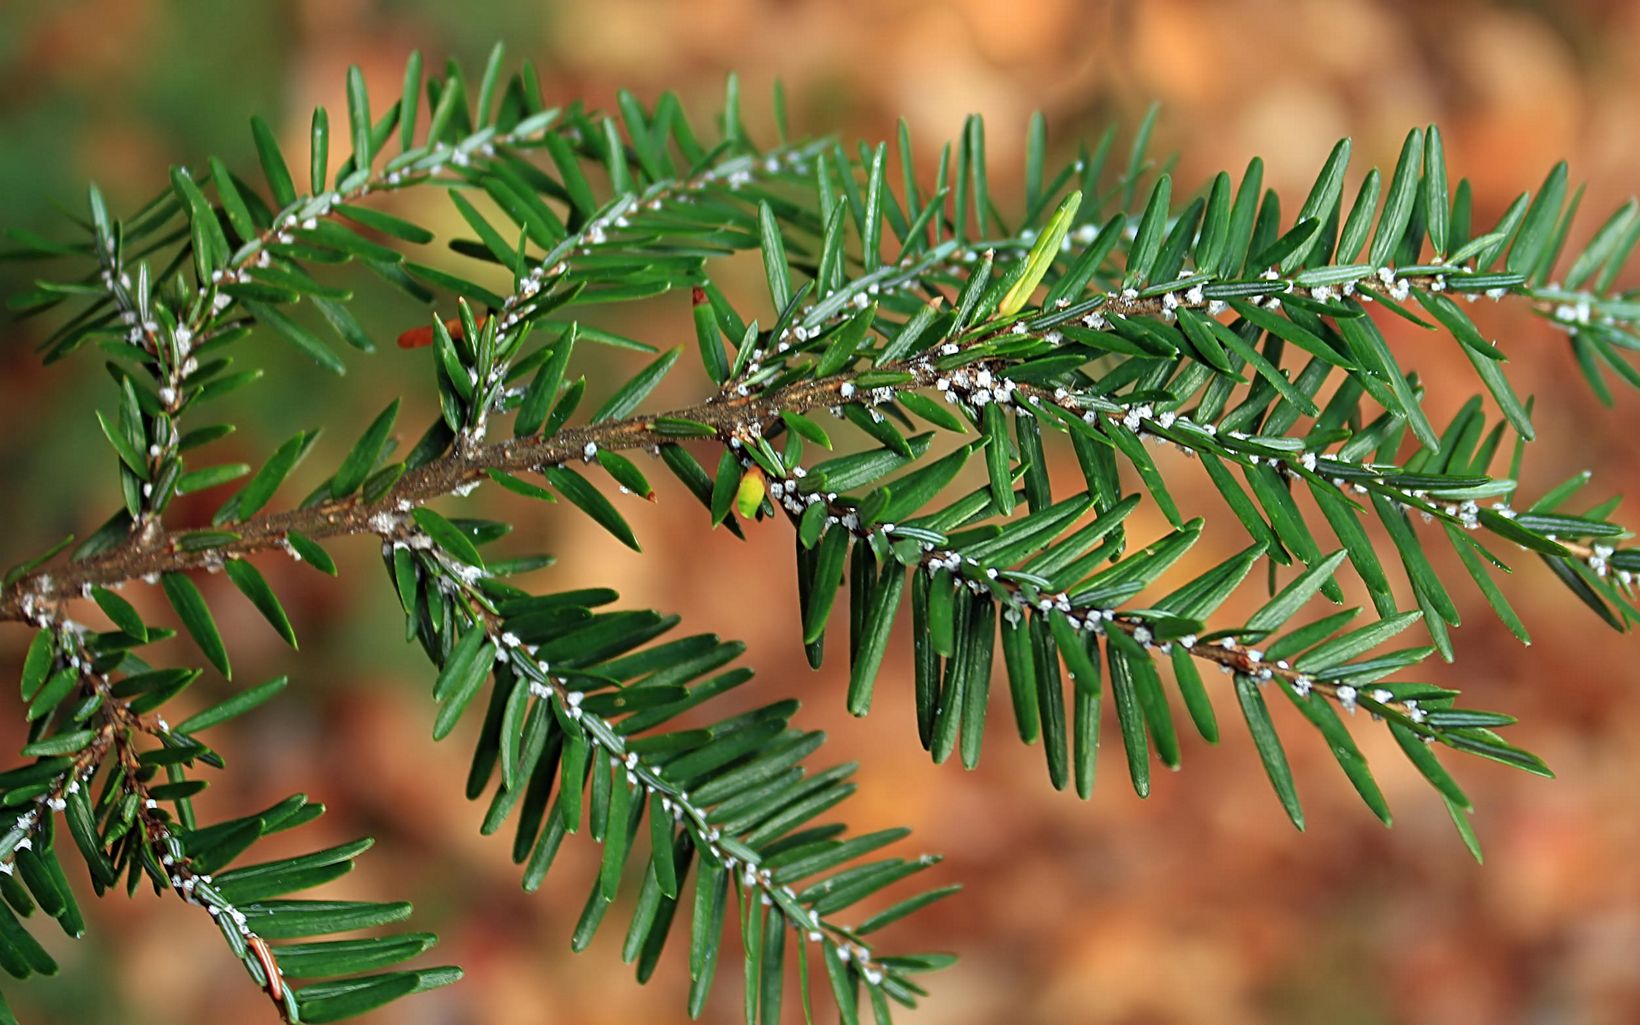 Hemlock Forests Hemlock woolly adelgid and elongate hemlock scale have killed millions of eastern hemlocks. TNC is working to protect the remaining Ohio's hemlock forests from these dangers. © Nicholas A. Tonelli/Creative Commons